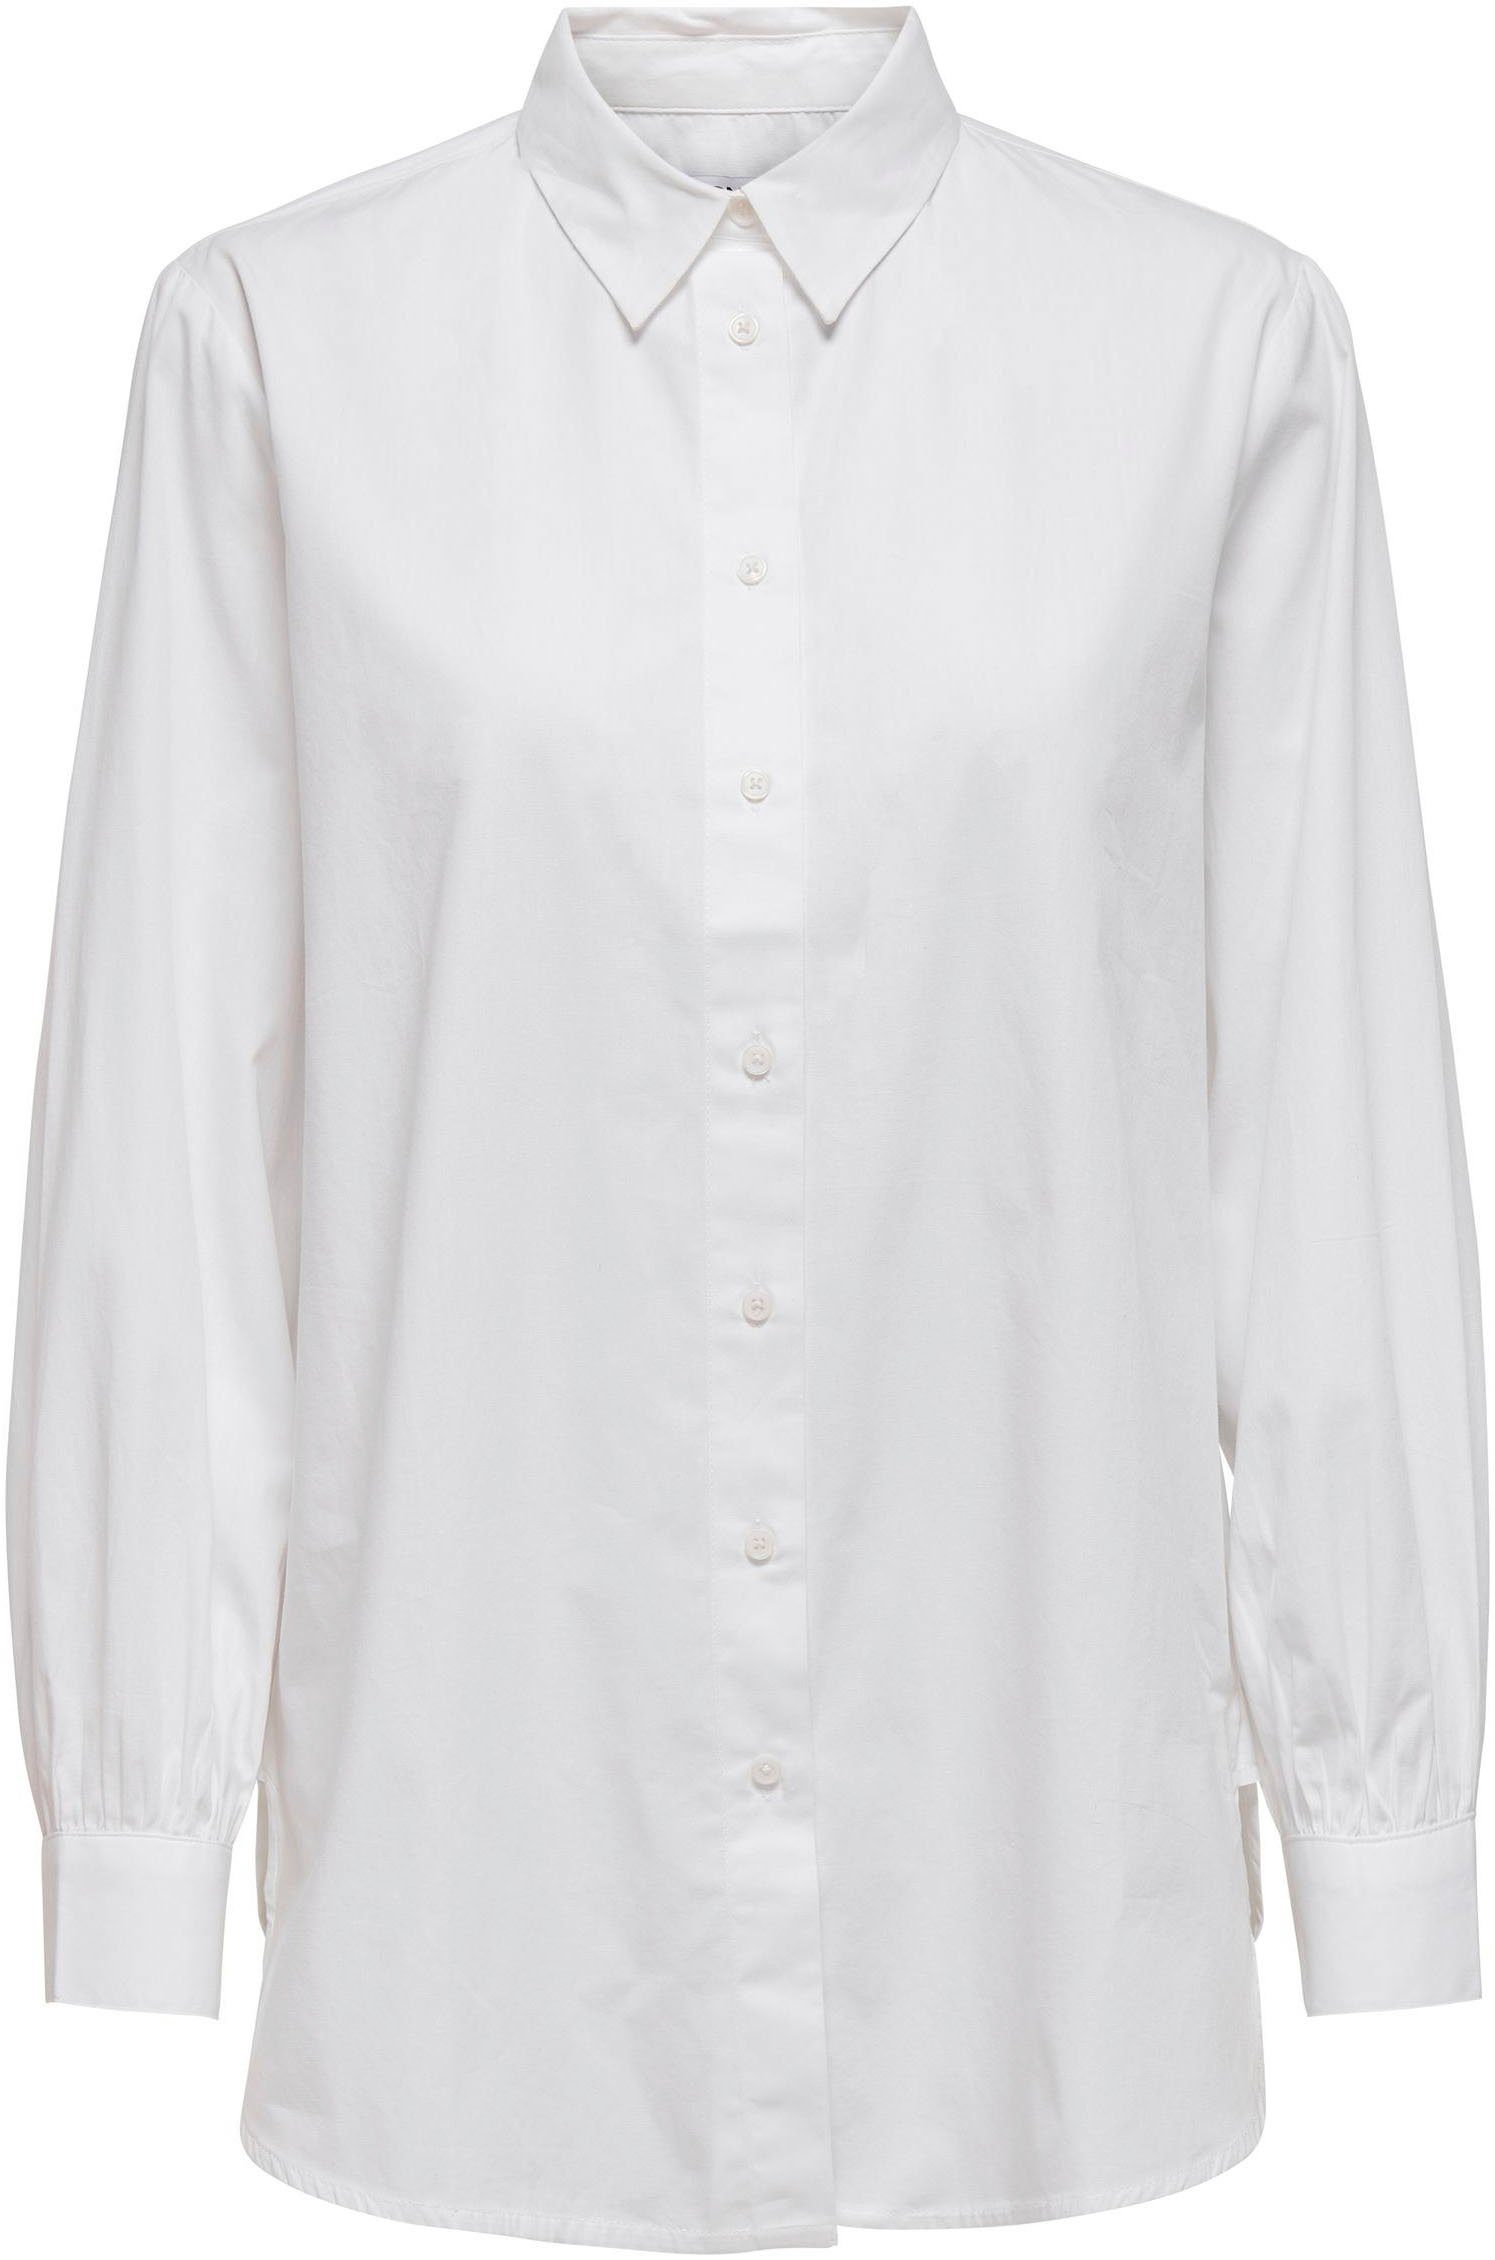 WVN White ONLNORA Longbluse SHIRT NEW ONLY L/S